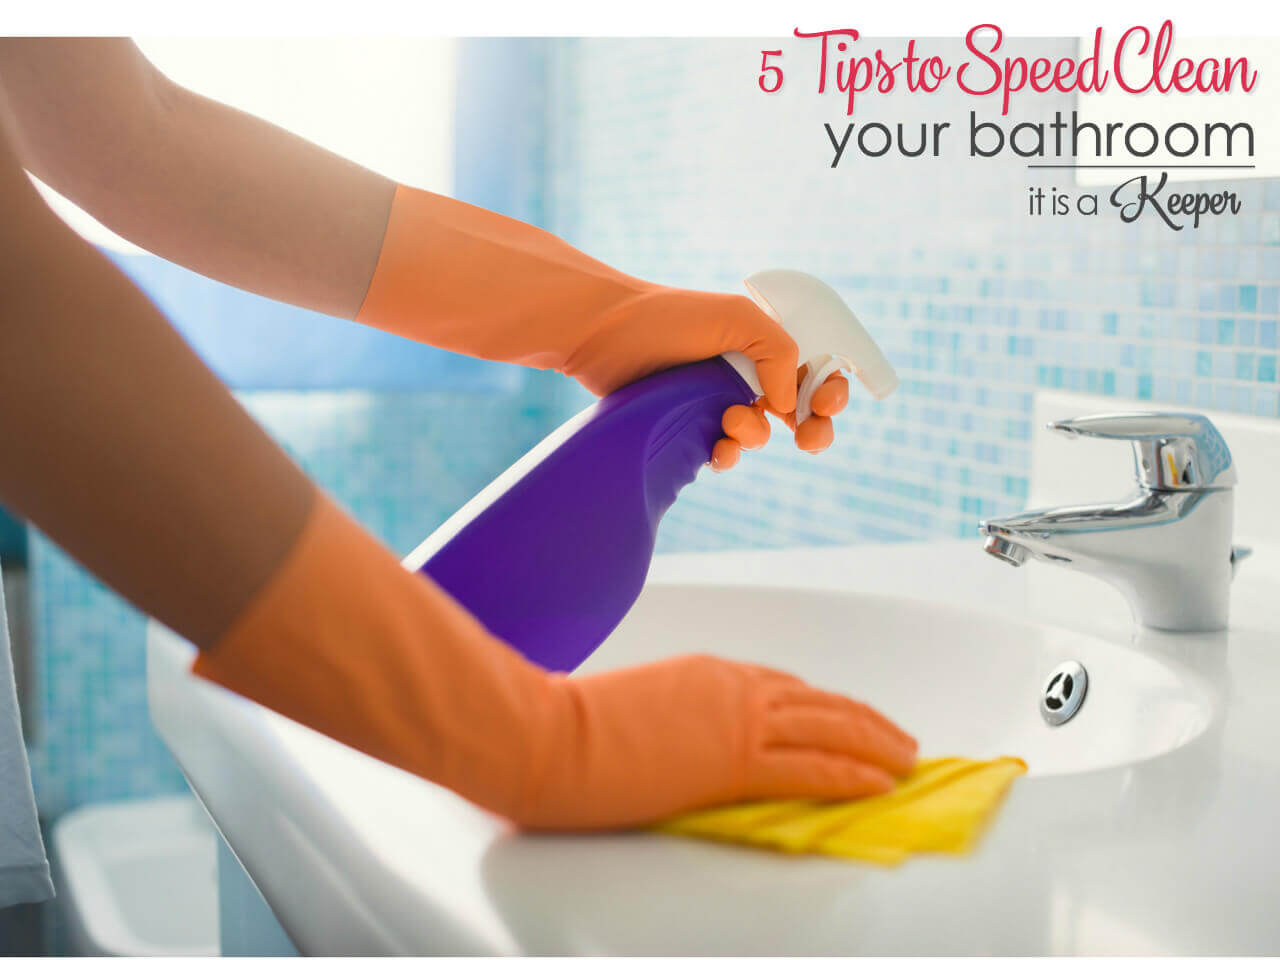 5 Tips to speed clean your bathroom